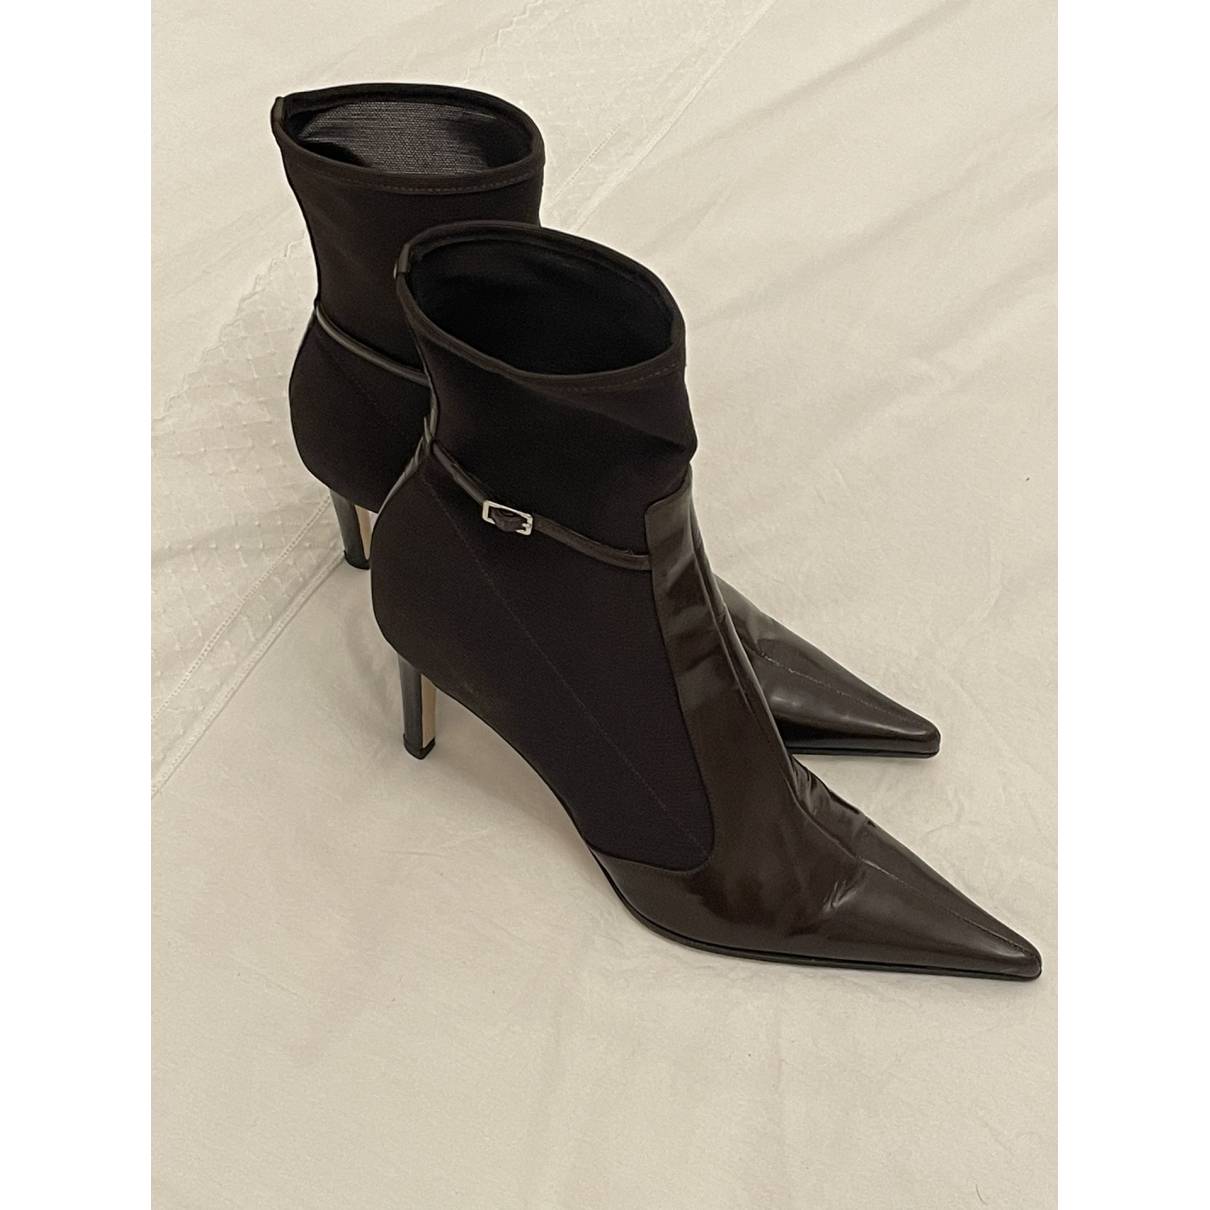 Buy Sergio Rossi Patent leather ankle boots online